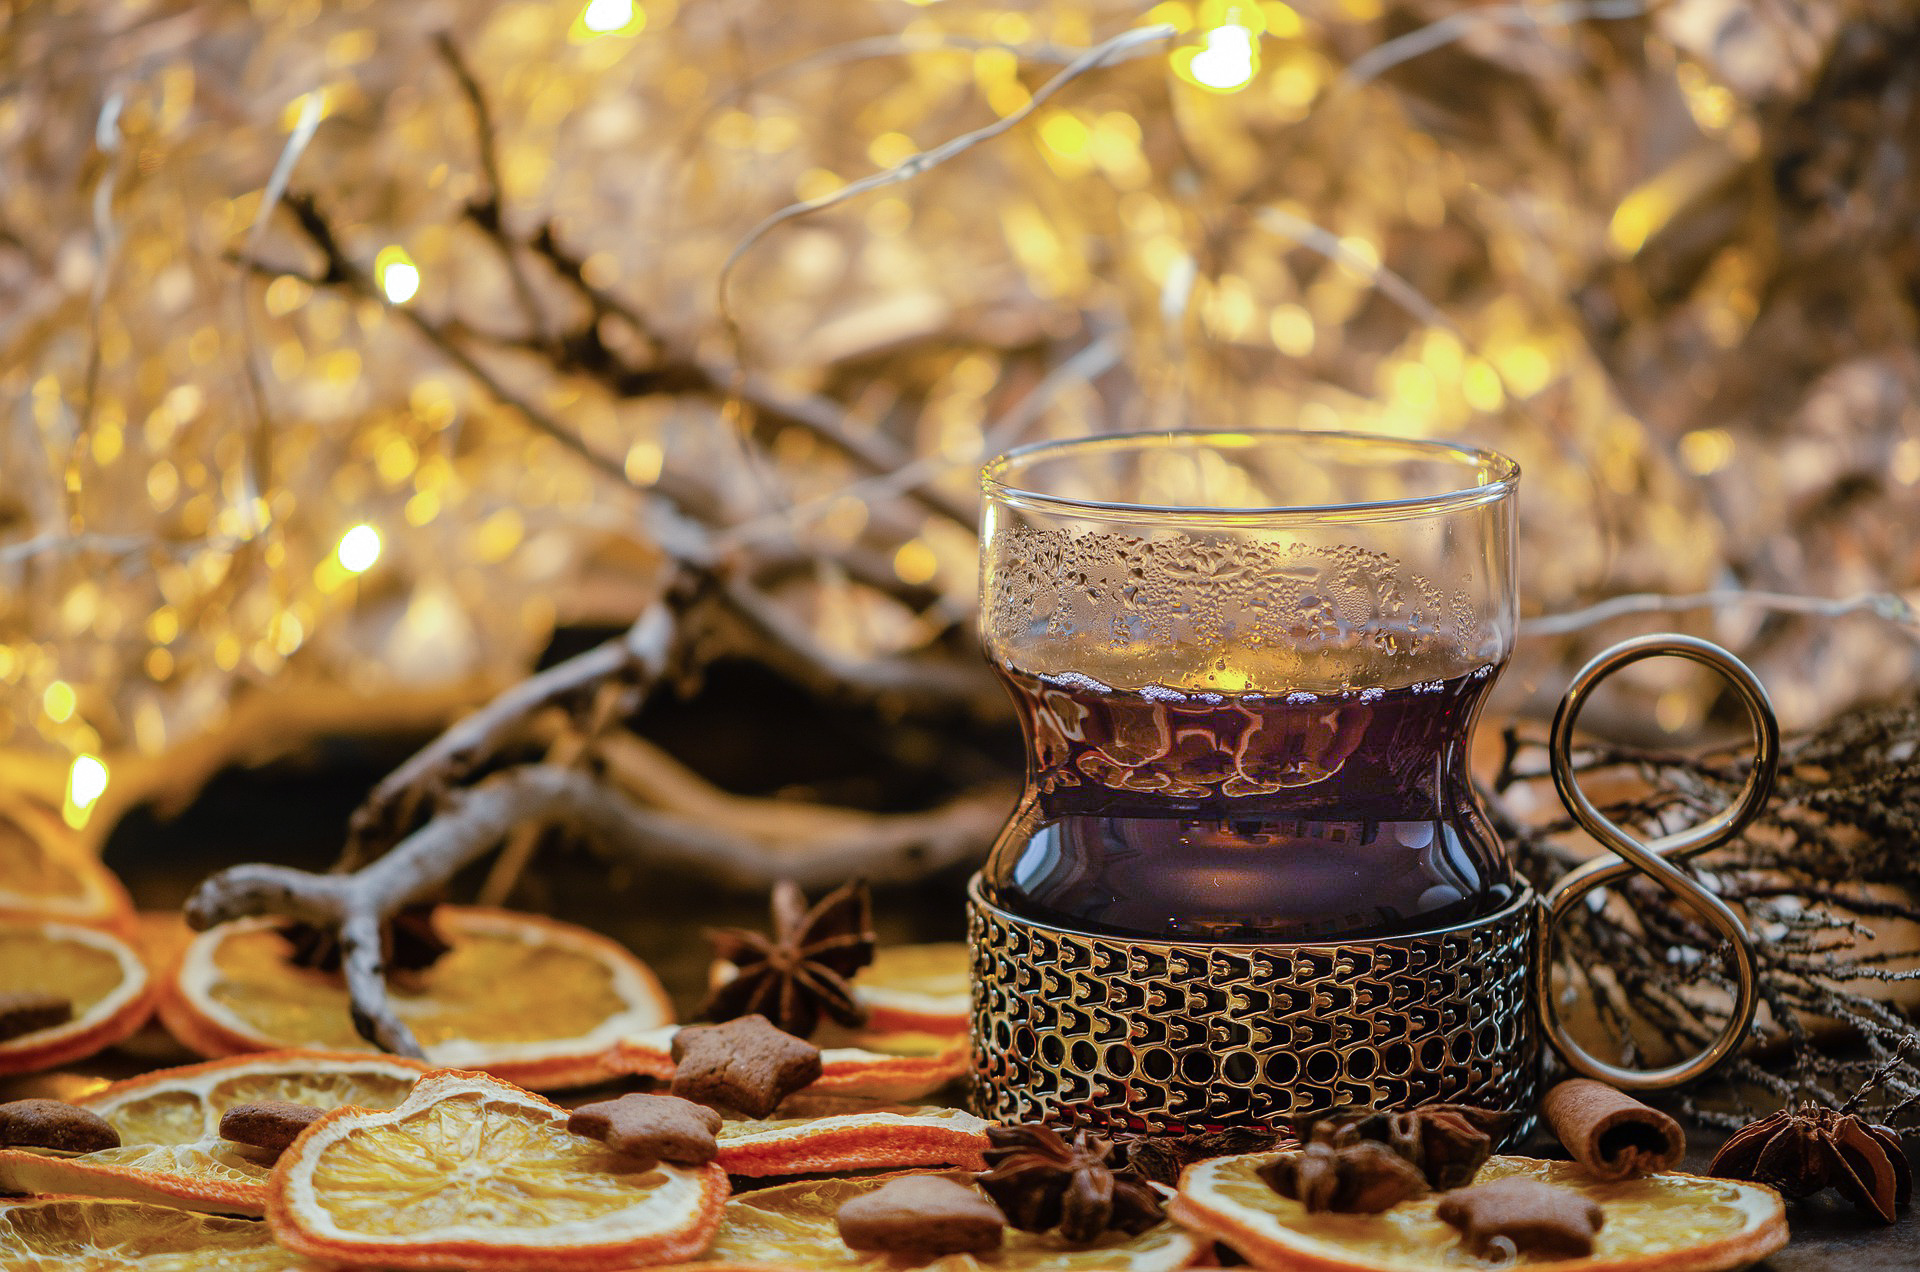 A glass of hot mulled wine on some slices of orange, anise stars and with Christmas lights in the background